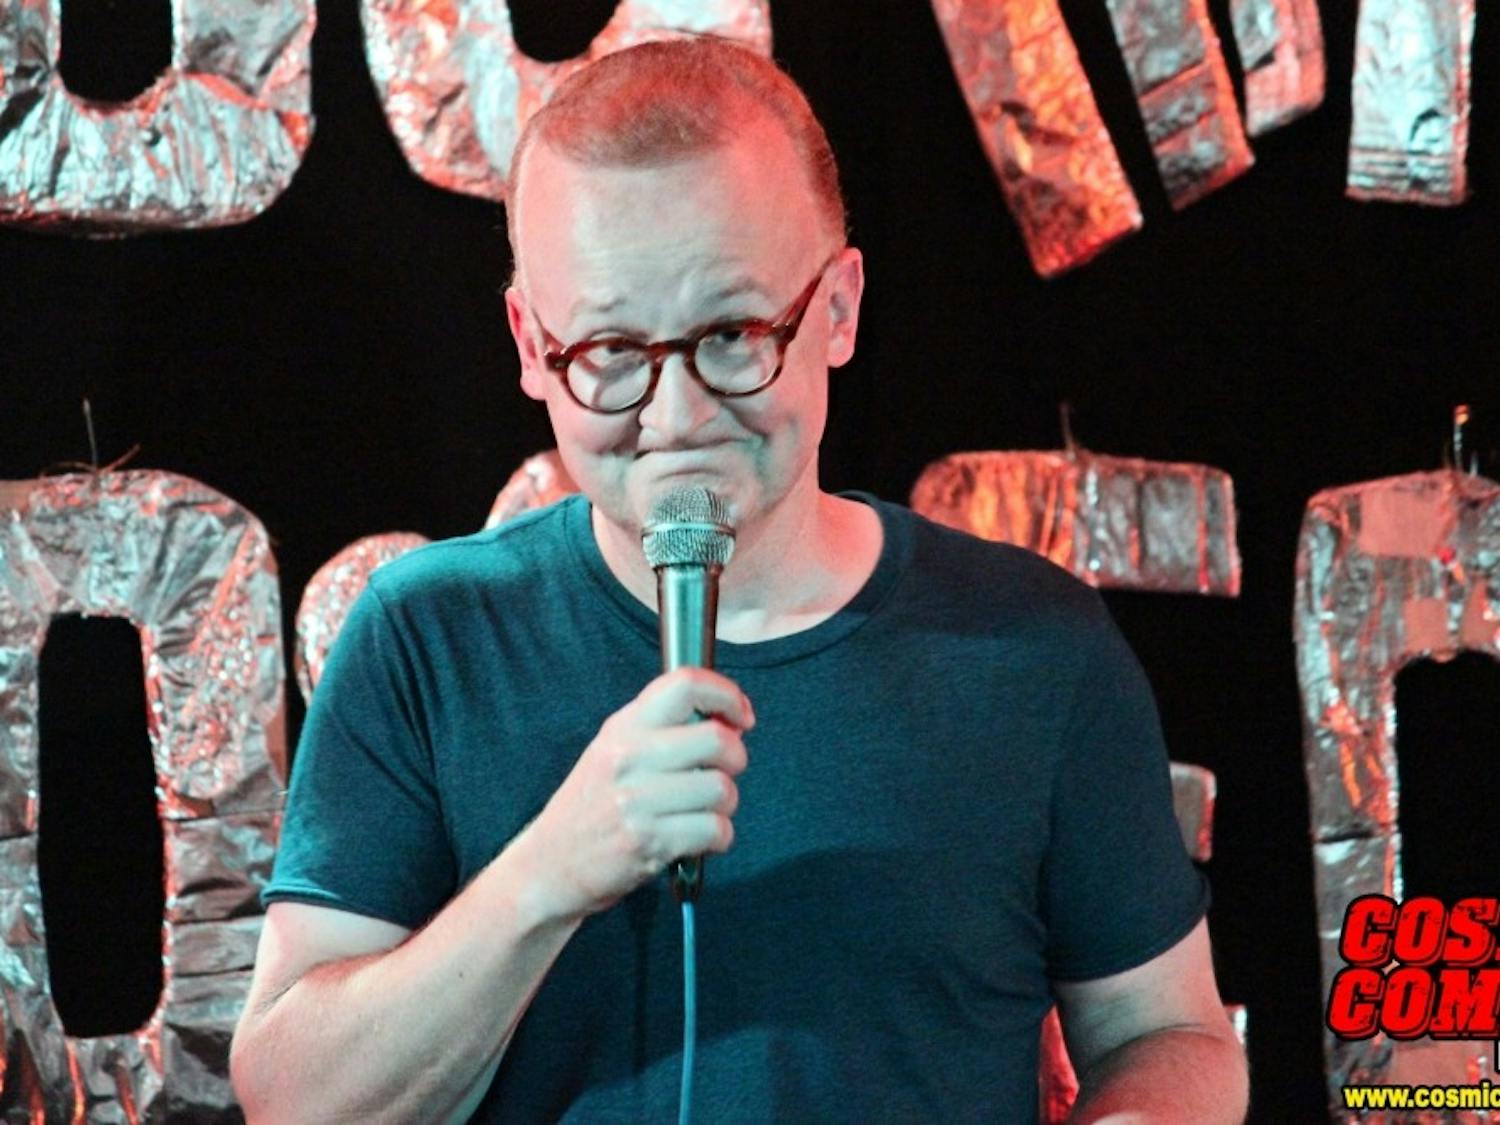 AU professor Doug Hecox performed at a comedy club in Berlin in August.&nbsp;